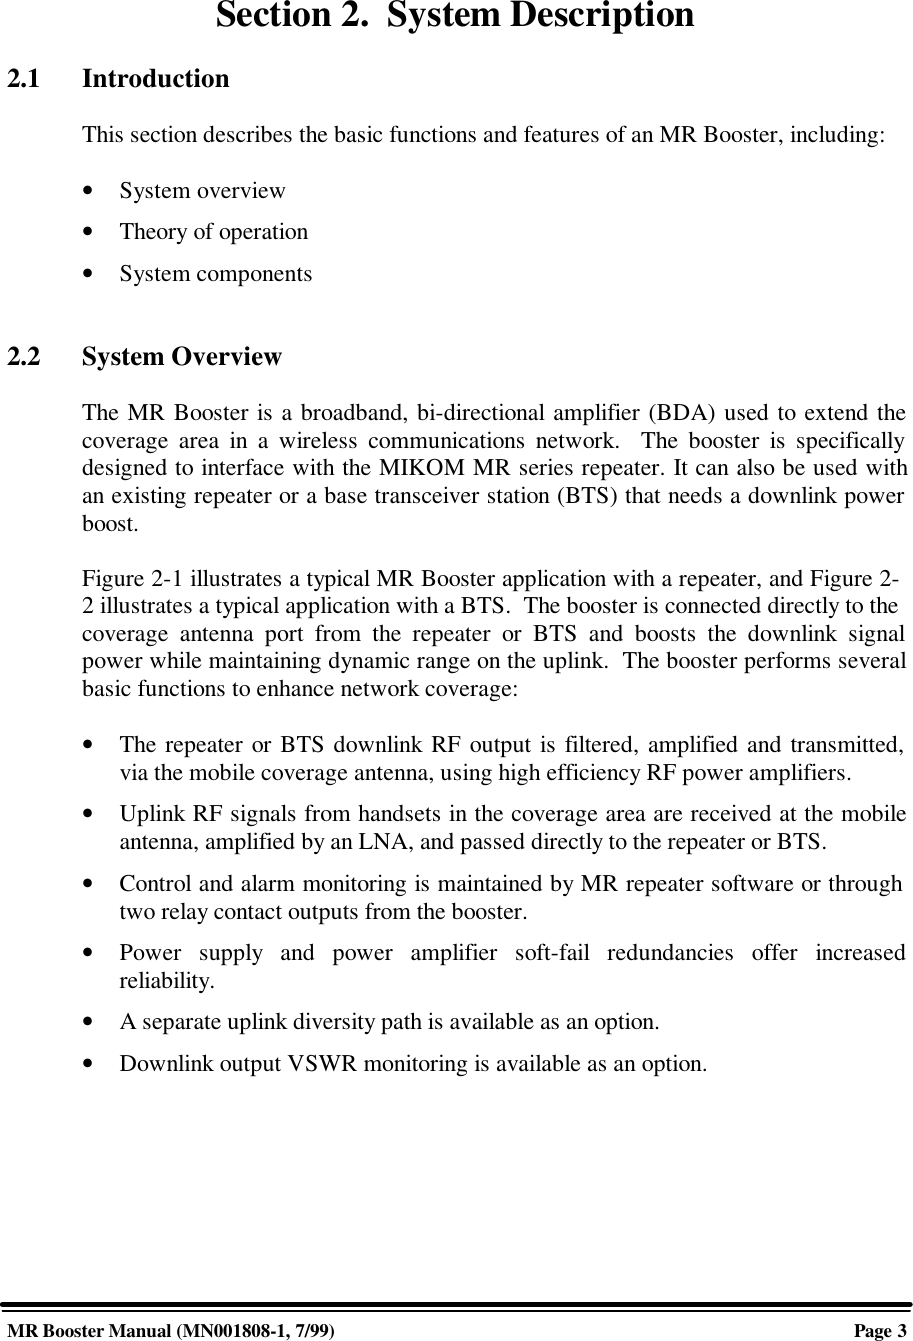 MR Booster Manual (MN001808-1, 7/99)Page 3Section 2.  System Description2.1 IntroductionThis section describes the basic functions and features of an MR Booster, including:• System overview• Theory of operation• System components2.2 System OverviewThe MR Booster is a broadband, bi-directional amplifier (BDA) used to extend thecoverage area in a wireless communications network.  The booster is specificallydesigned to interface with the MIKOM MR series repeater. It can also be used withan existing repeater or a base transceiver station (BTS) that needs a downlink powerboost.Figure 2-1 illustrates a typical MR Booster application with a repeater, and Figure 2-2 illustrates a typical application with a BTS.  The booster is connected directly to thecoverage antenna port from the repeater or BTS and boosts the downlink signalpower while maintaining dynamic range on the uplink.  The booster performs severalbasic functions to enhance network coverage:• The repeater or BTS downlink RF output is filtered, amplified and transmitted,via the mobile coverage antenna, using high efficiency RF power amplifiers.• Uplink RF signals from handsets in the coverage area are received at the mobileantenna, amplified by an LNA, and passed directly to the repeater or BTS.• Control and alarm monitoring is maintained by MR repeater software or throughtwo relay contact outputs from the booster.• Power supply and power amplifier soft-fail redundancies offer increasedreliability.• A separate uplink diversity path is available as an option.• Downlink output VSWR monitoring is available as an option.